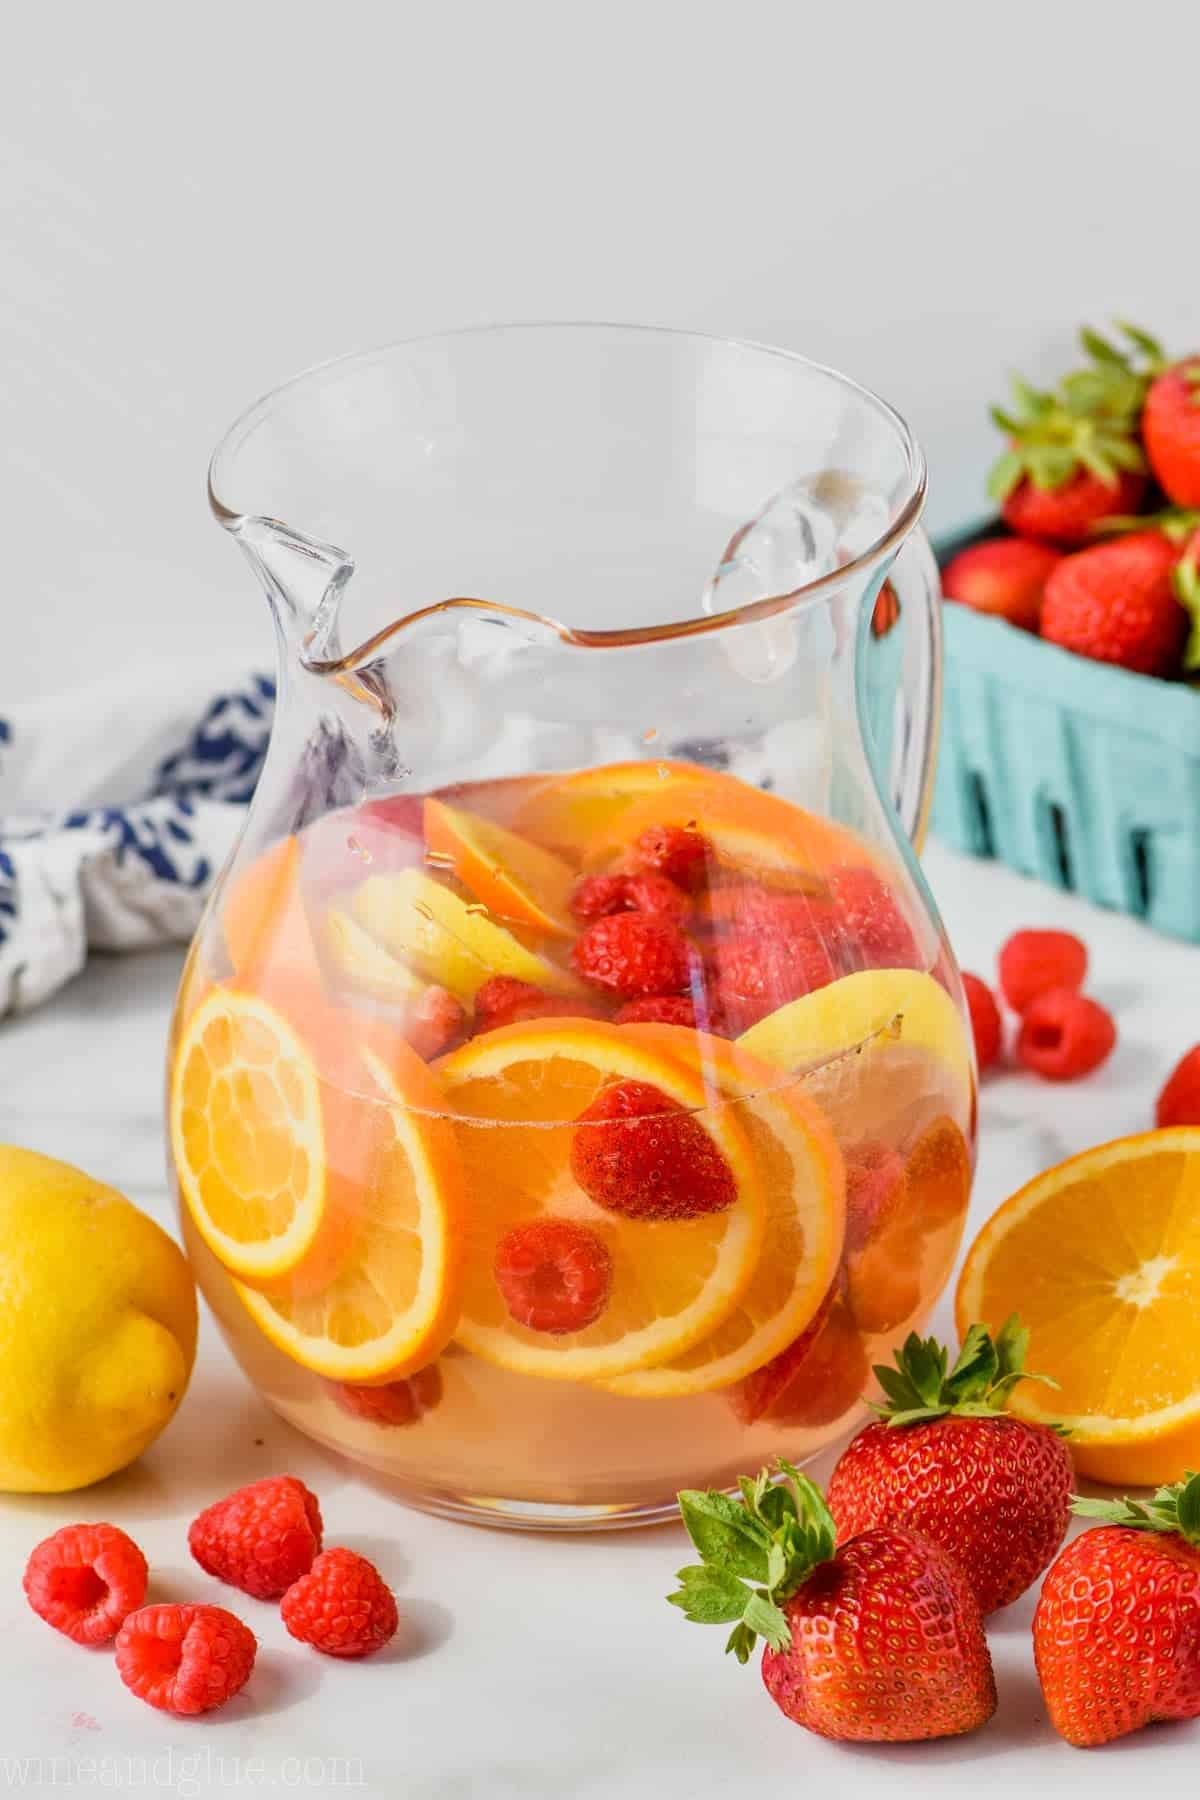 Best Sangria Drink Recipe - How to Make Sangria Pitcher